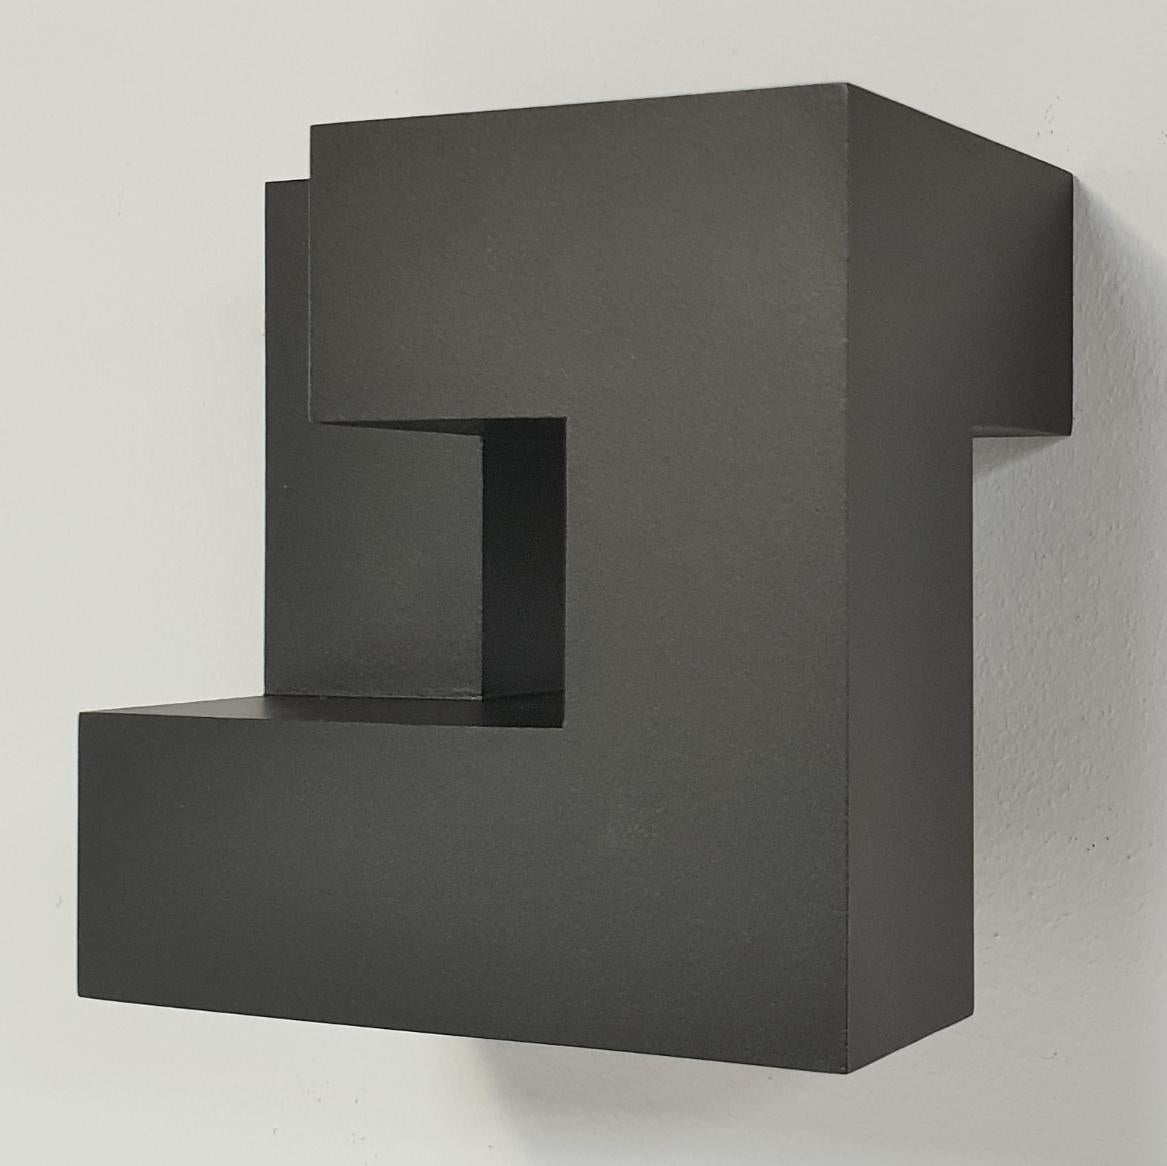 Olivier Julia Abstract Painting - Carré architectural III no. 3/15 - contemporary modern abstract wall sculpture